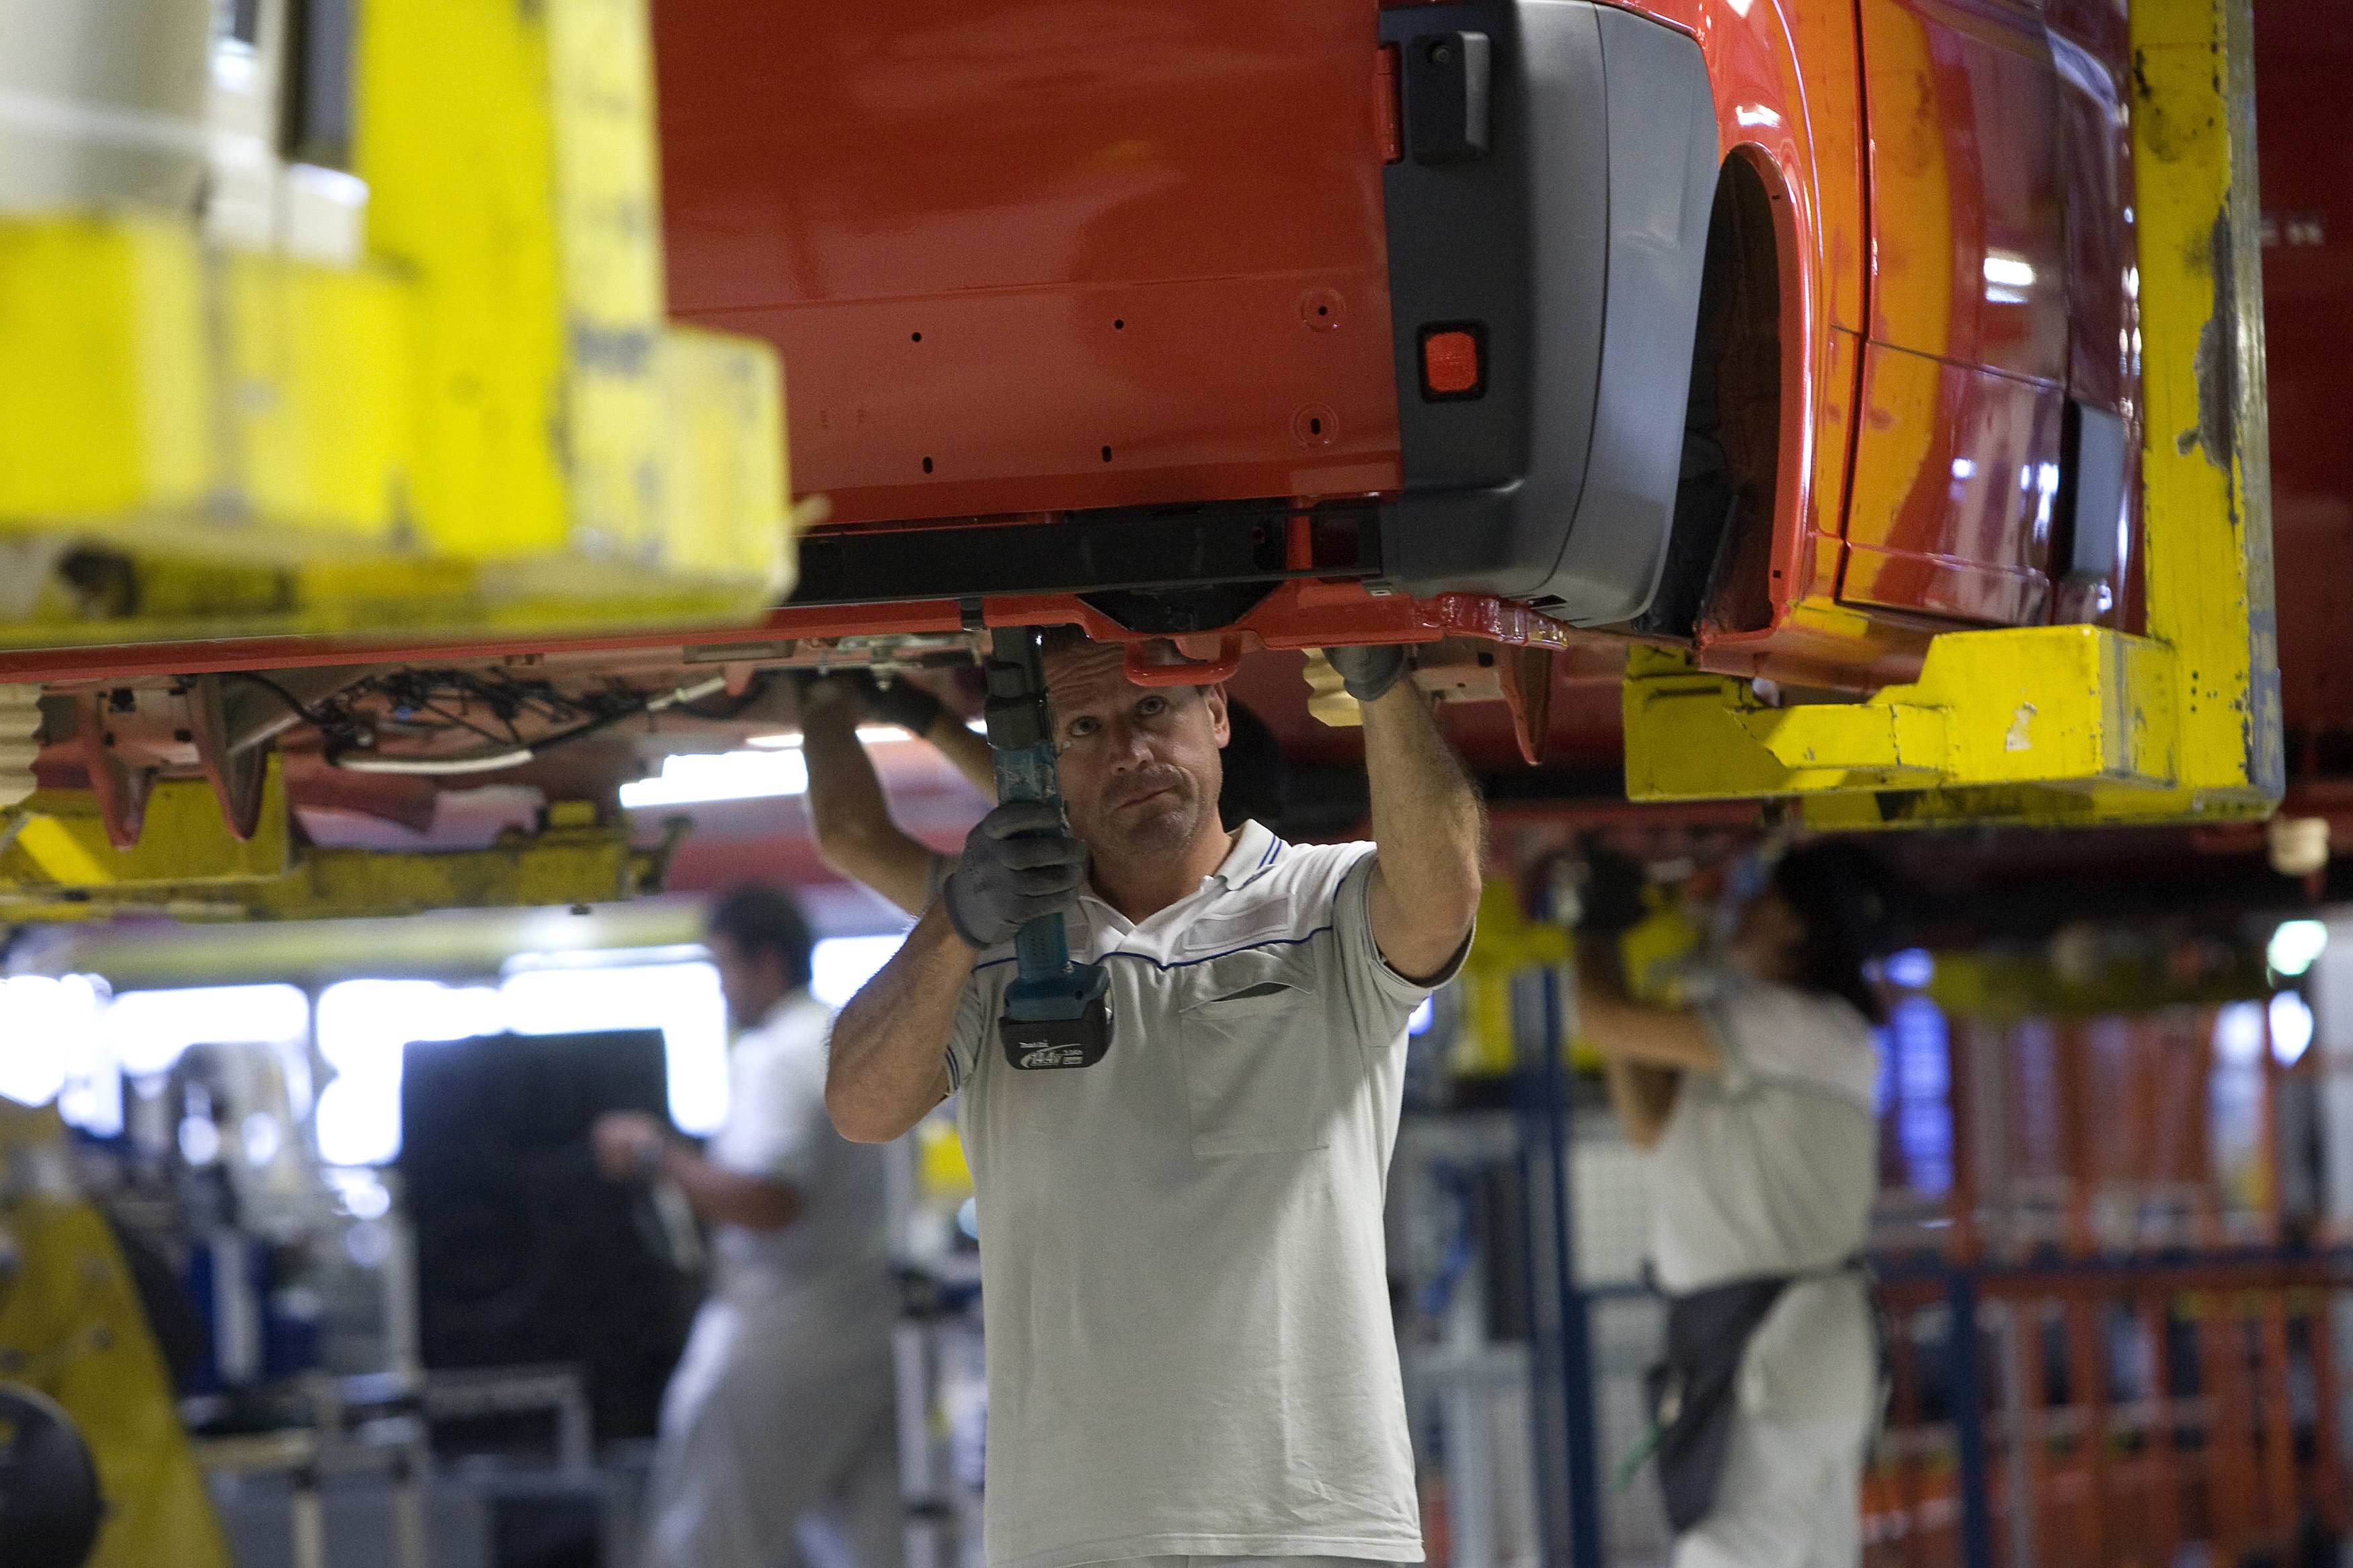 Workers at Fiat's Sevelsud plant in Atessa in central Italy. Fiat said on Tuesday it would freeze investments in new models until there is clarity over the impact of a court ruling that cast doubt on its labour relations. Photo: Reuters